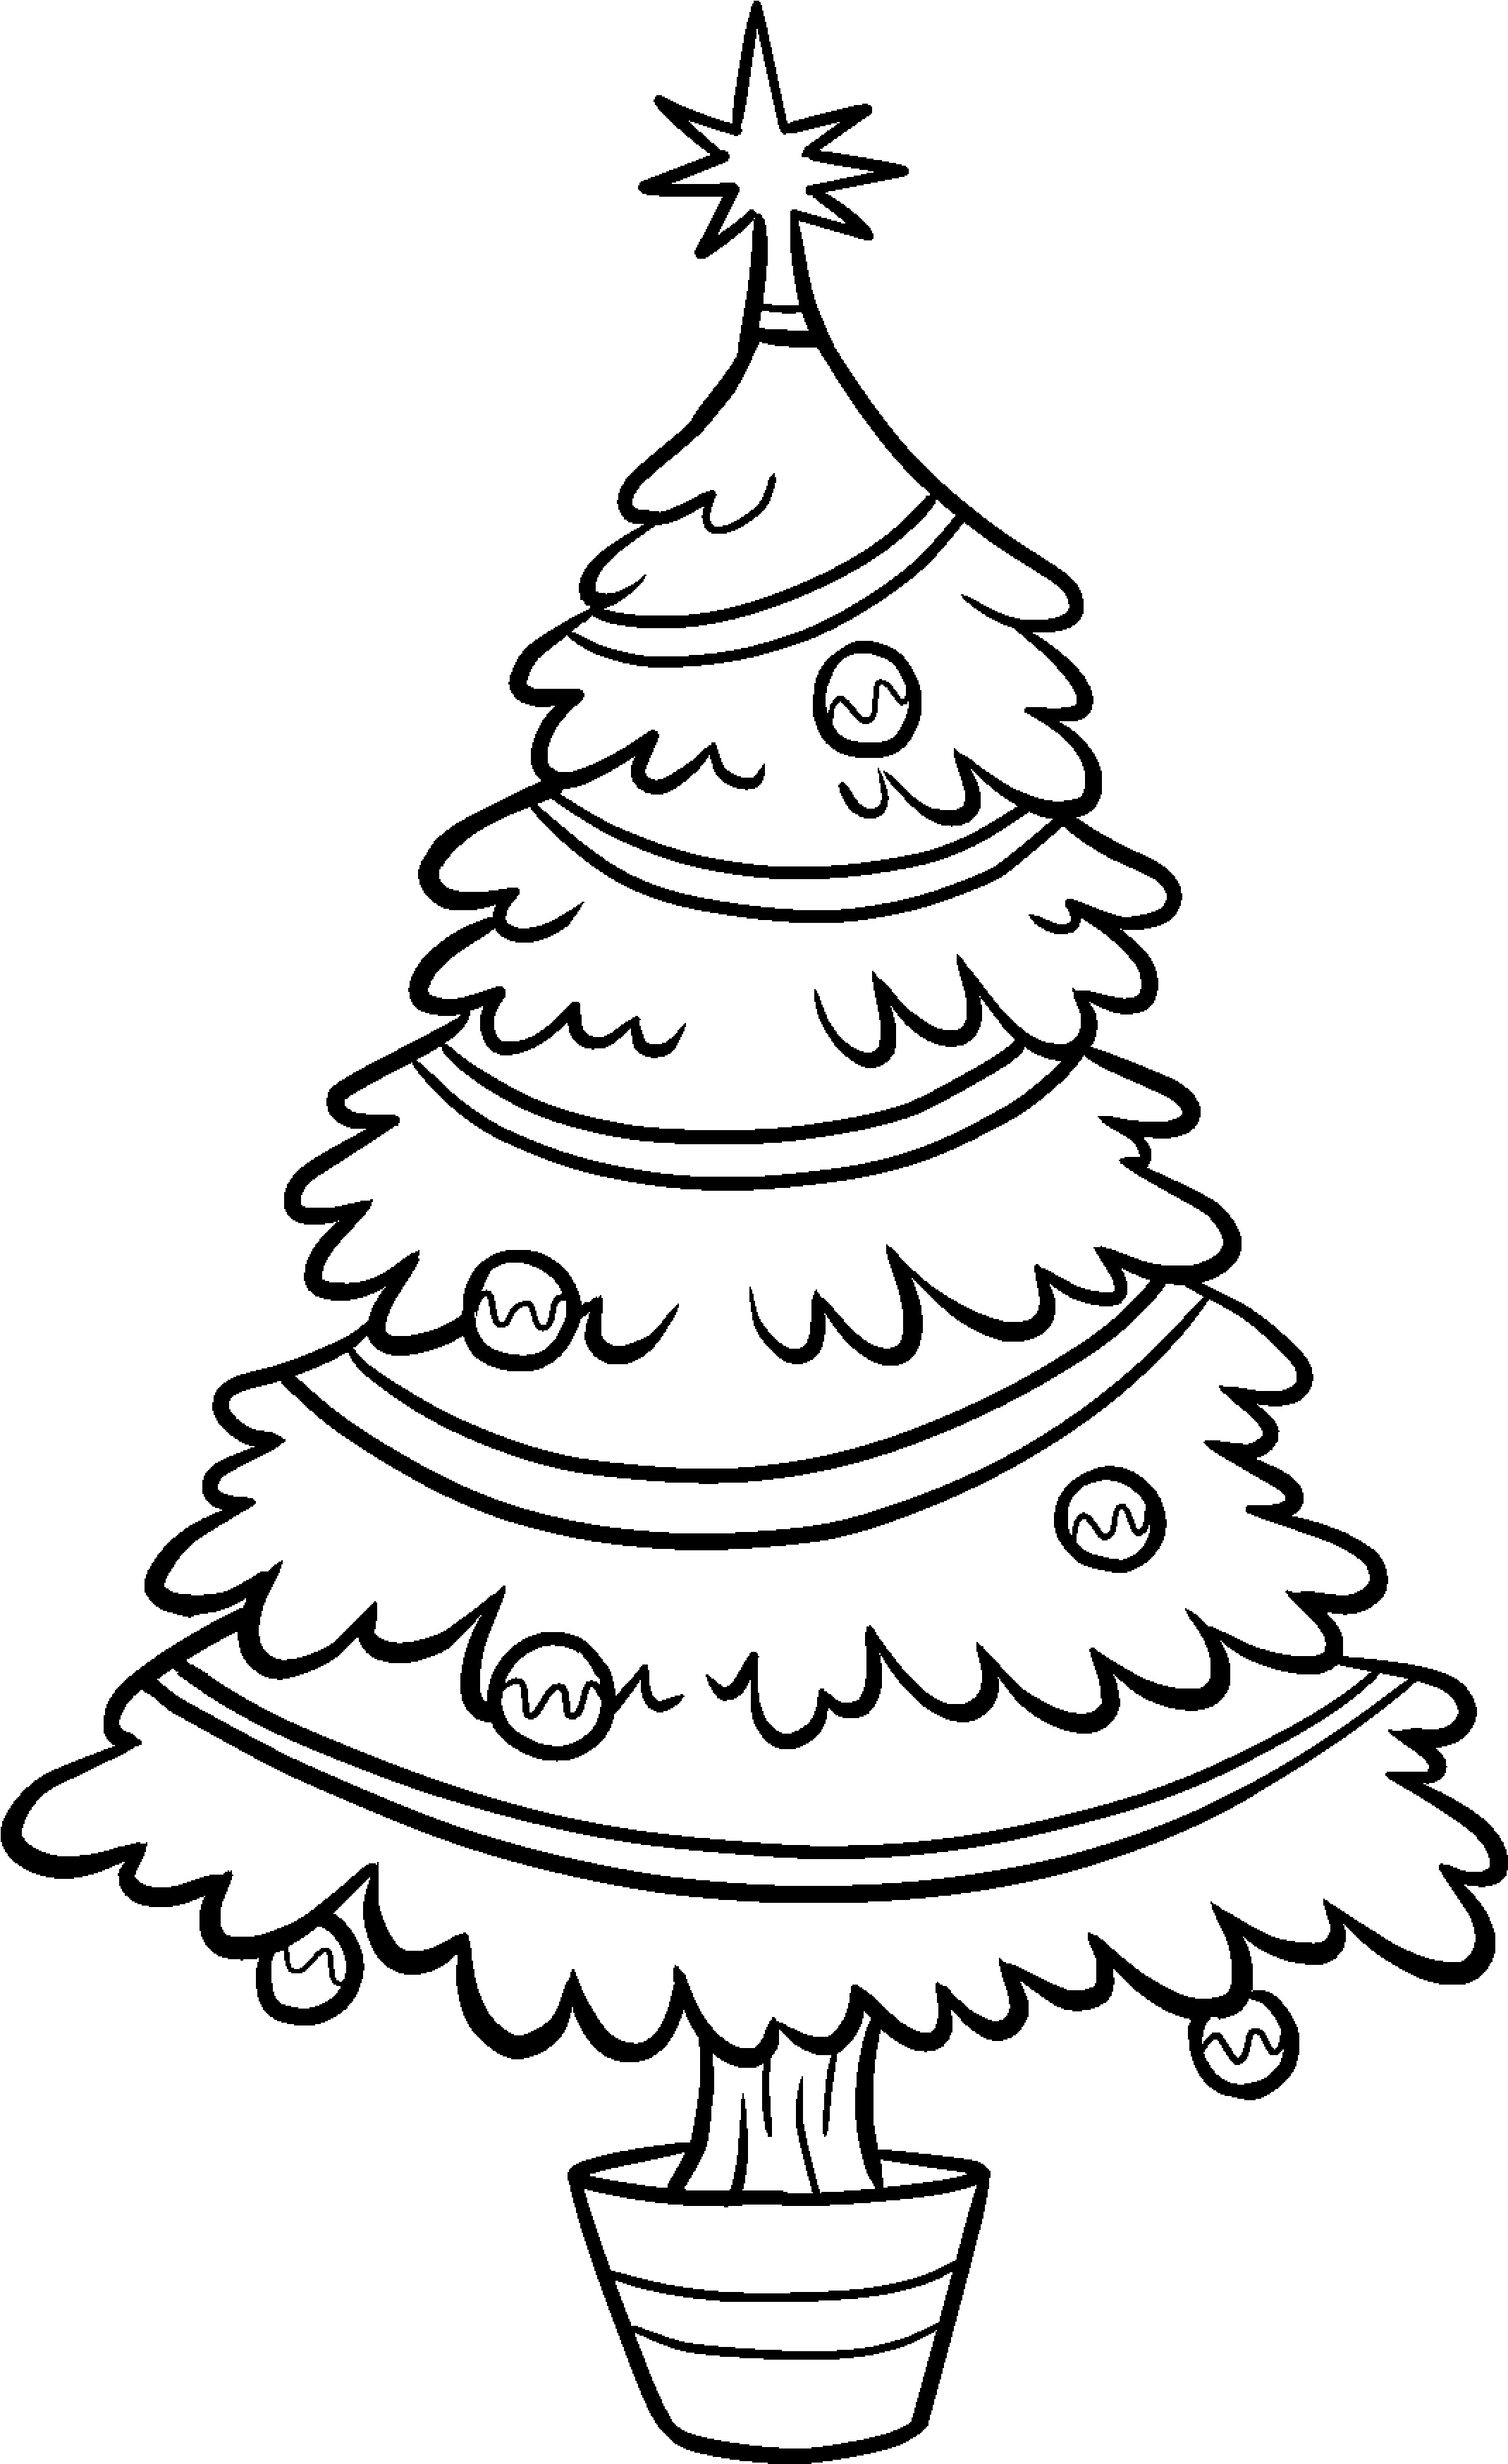 Download Christmas Tree Clipart Outline - Transparent Christmas Tree